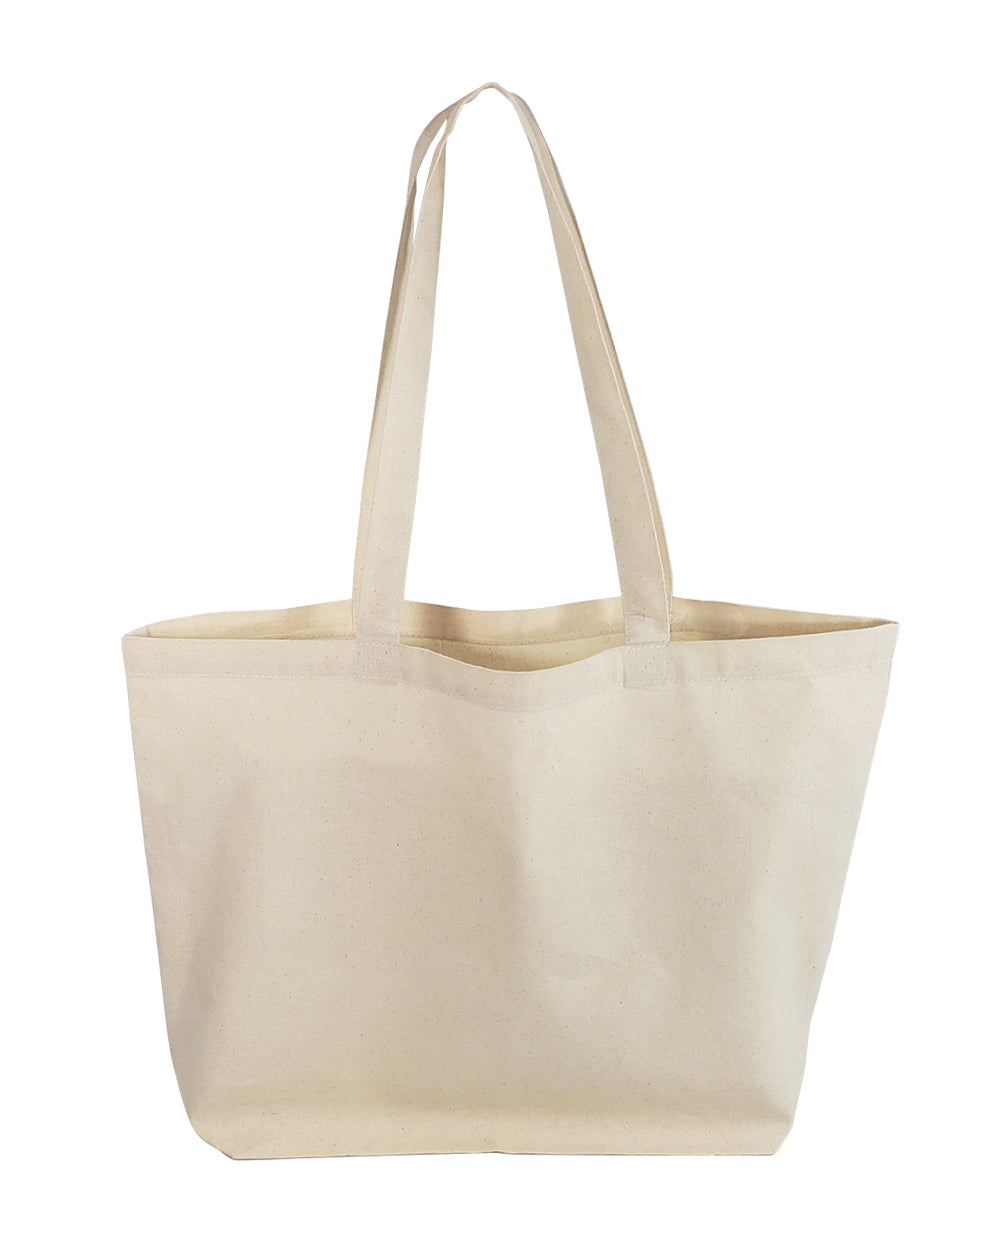 120 ct Large Size Light Canvas Wholesale Tote Bag with Long 